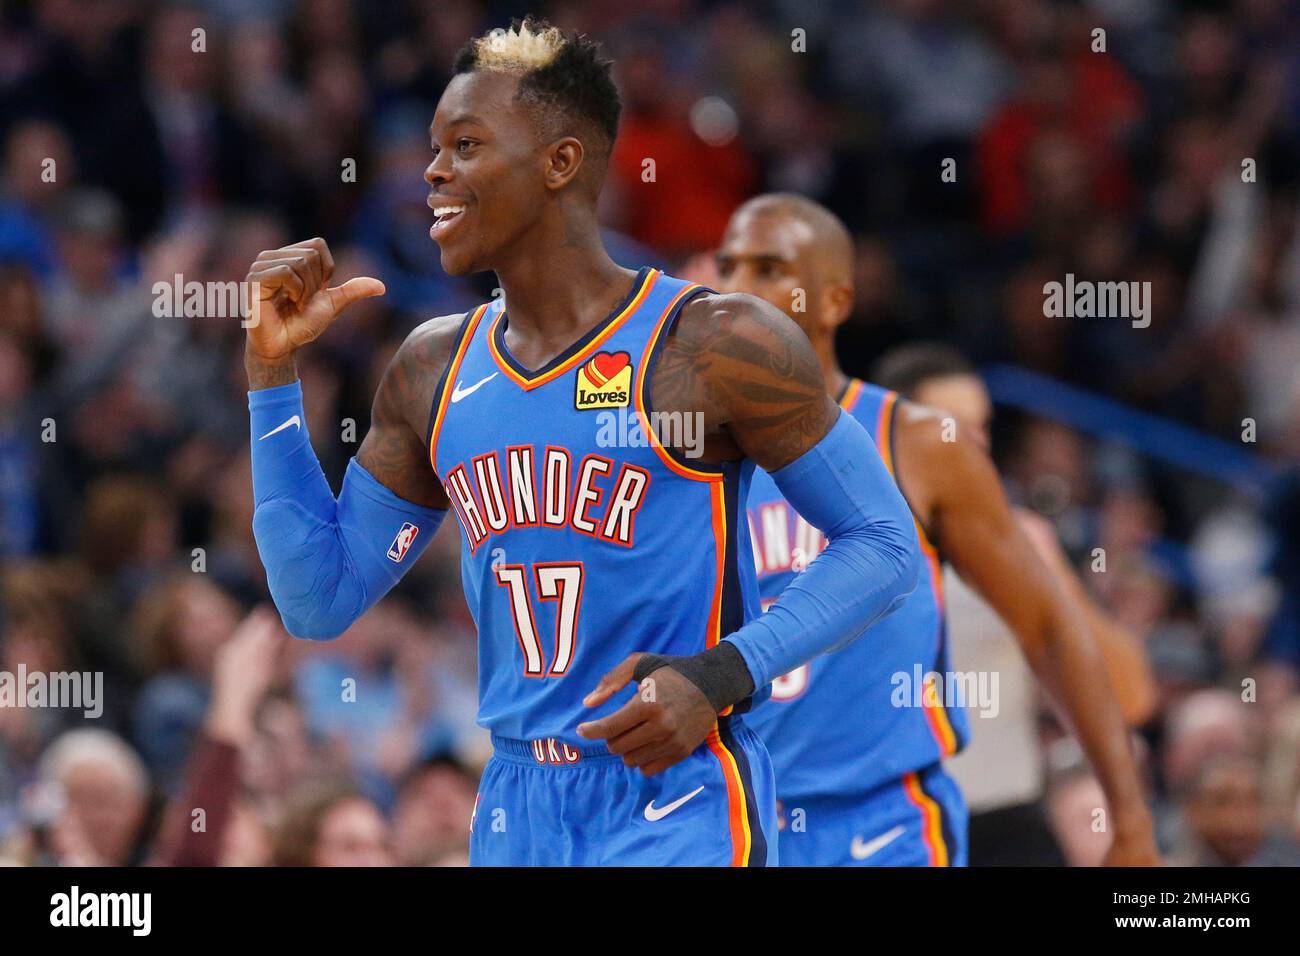 Oklahoma City Thunder guard Dennis Schroeder (17) celebrates after a basket  in the second half of the team's NBA basketball game against the Phoenix  Suns on Friday, Dec. 20, 2019, in Oklahoma